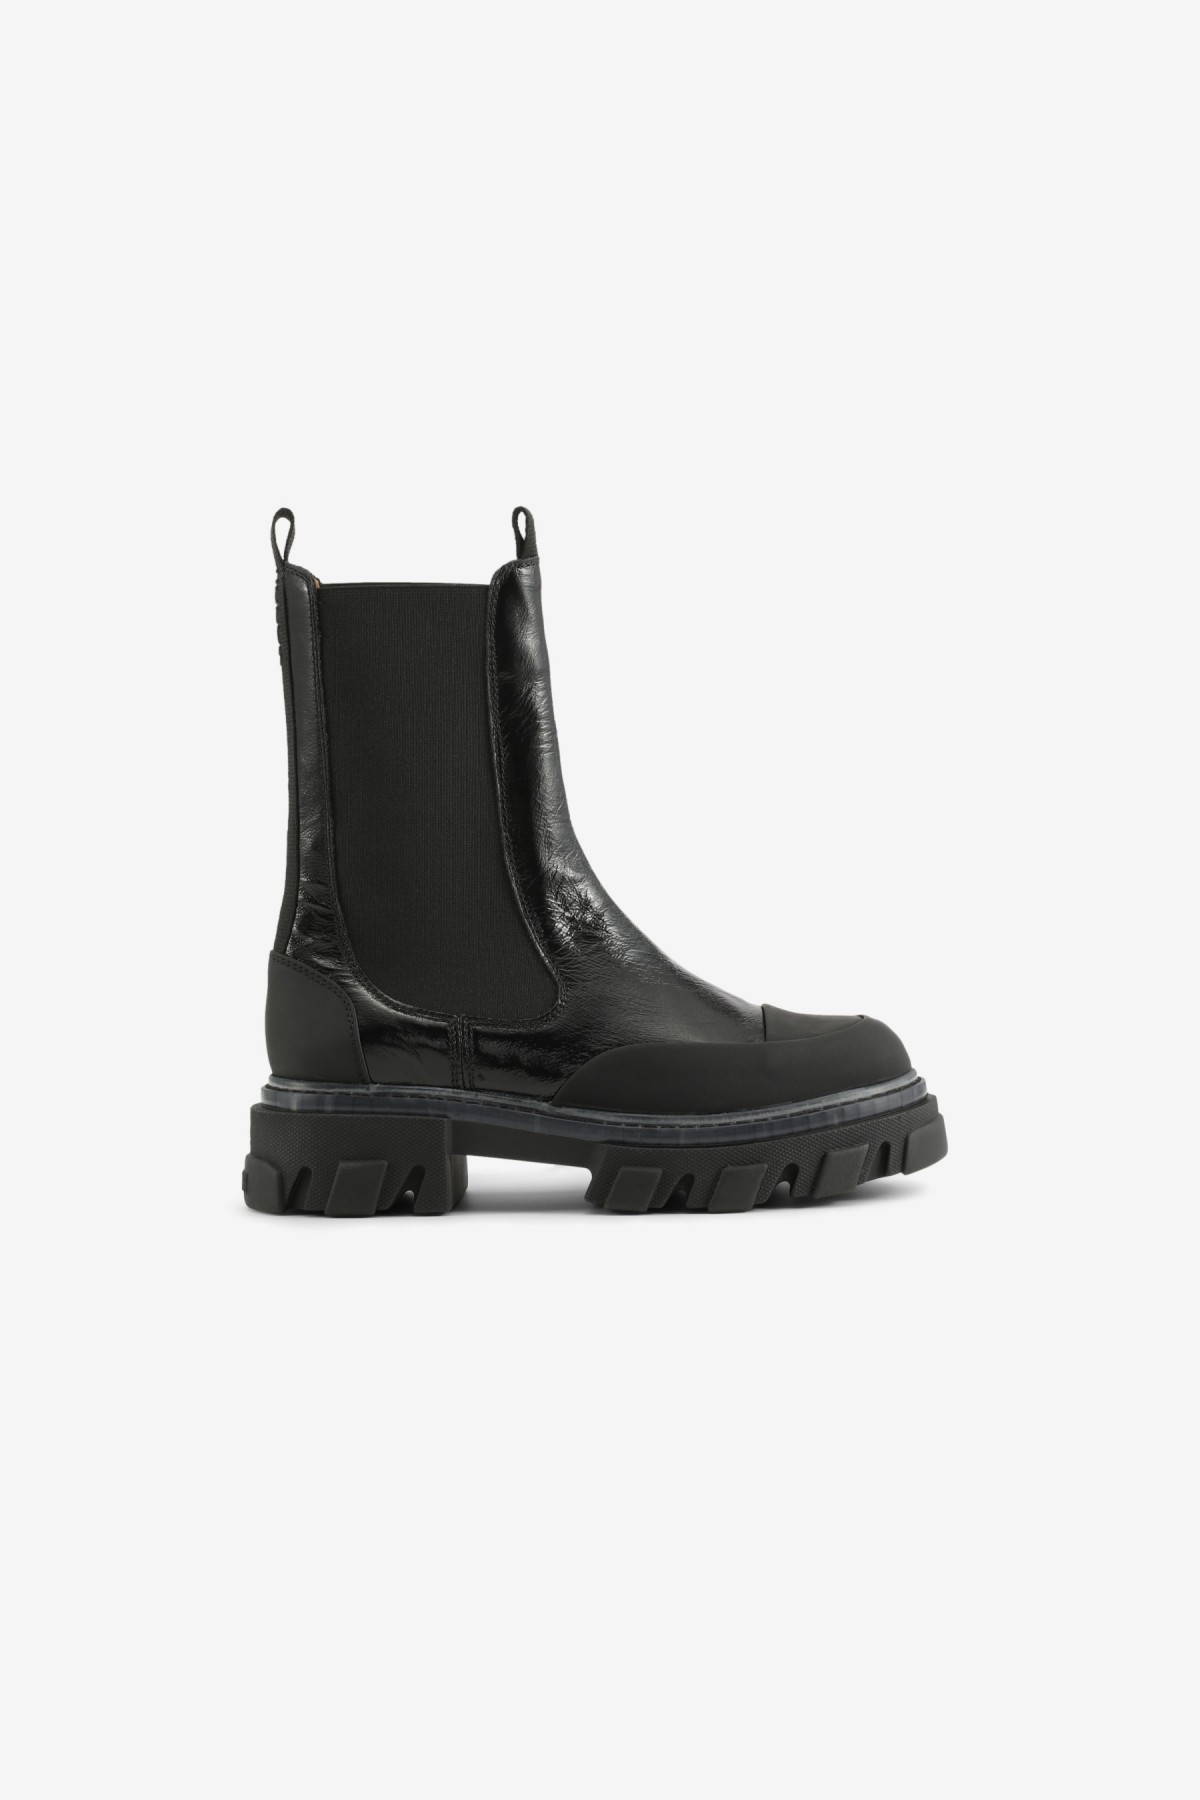 Ganni Cleated Mid Chelsea Boot Transp Welt Naplack in Black